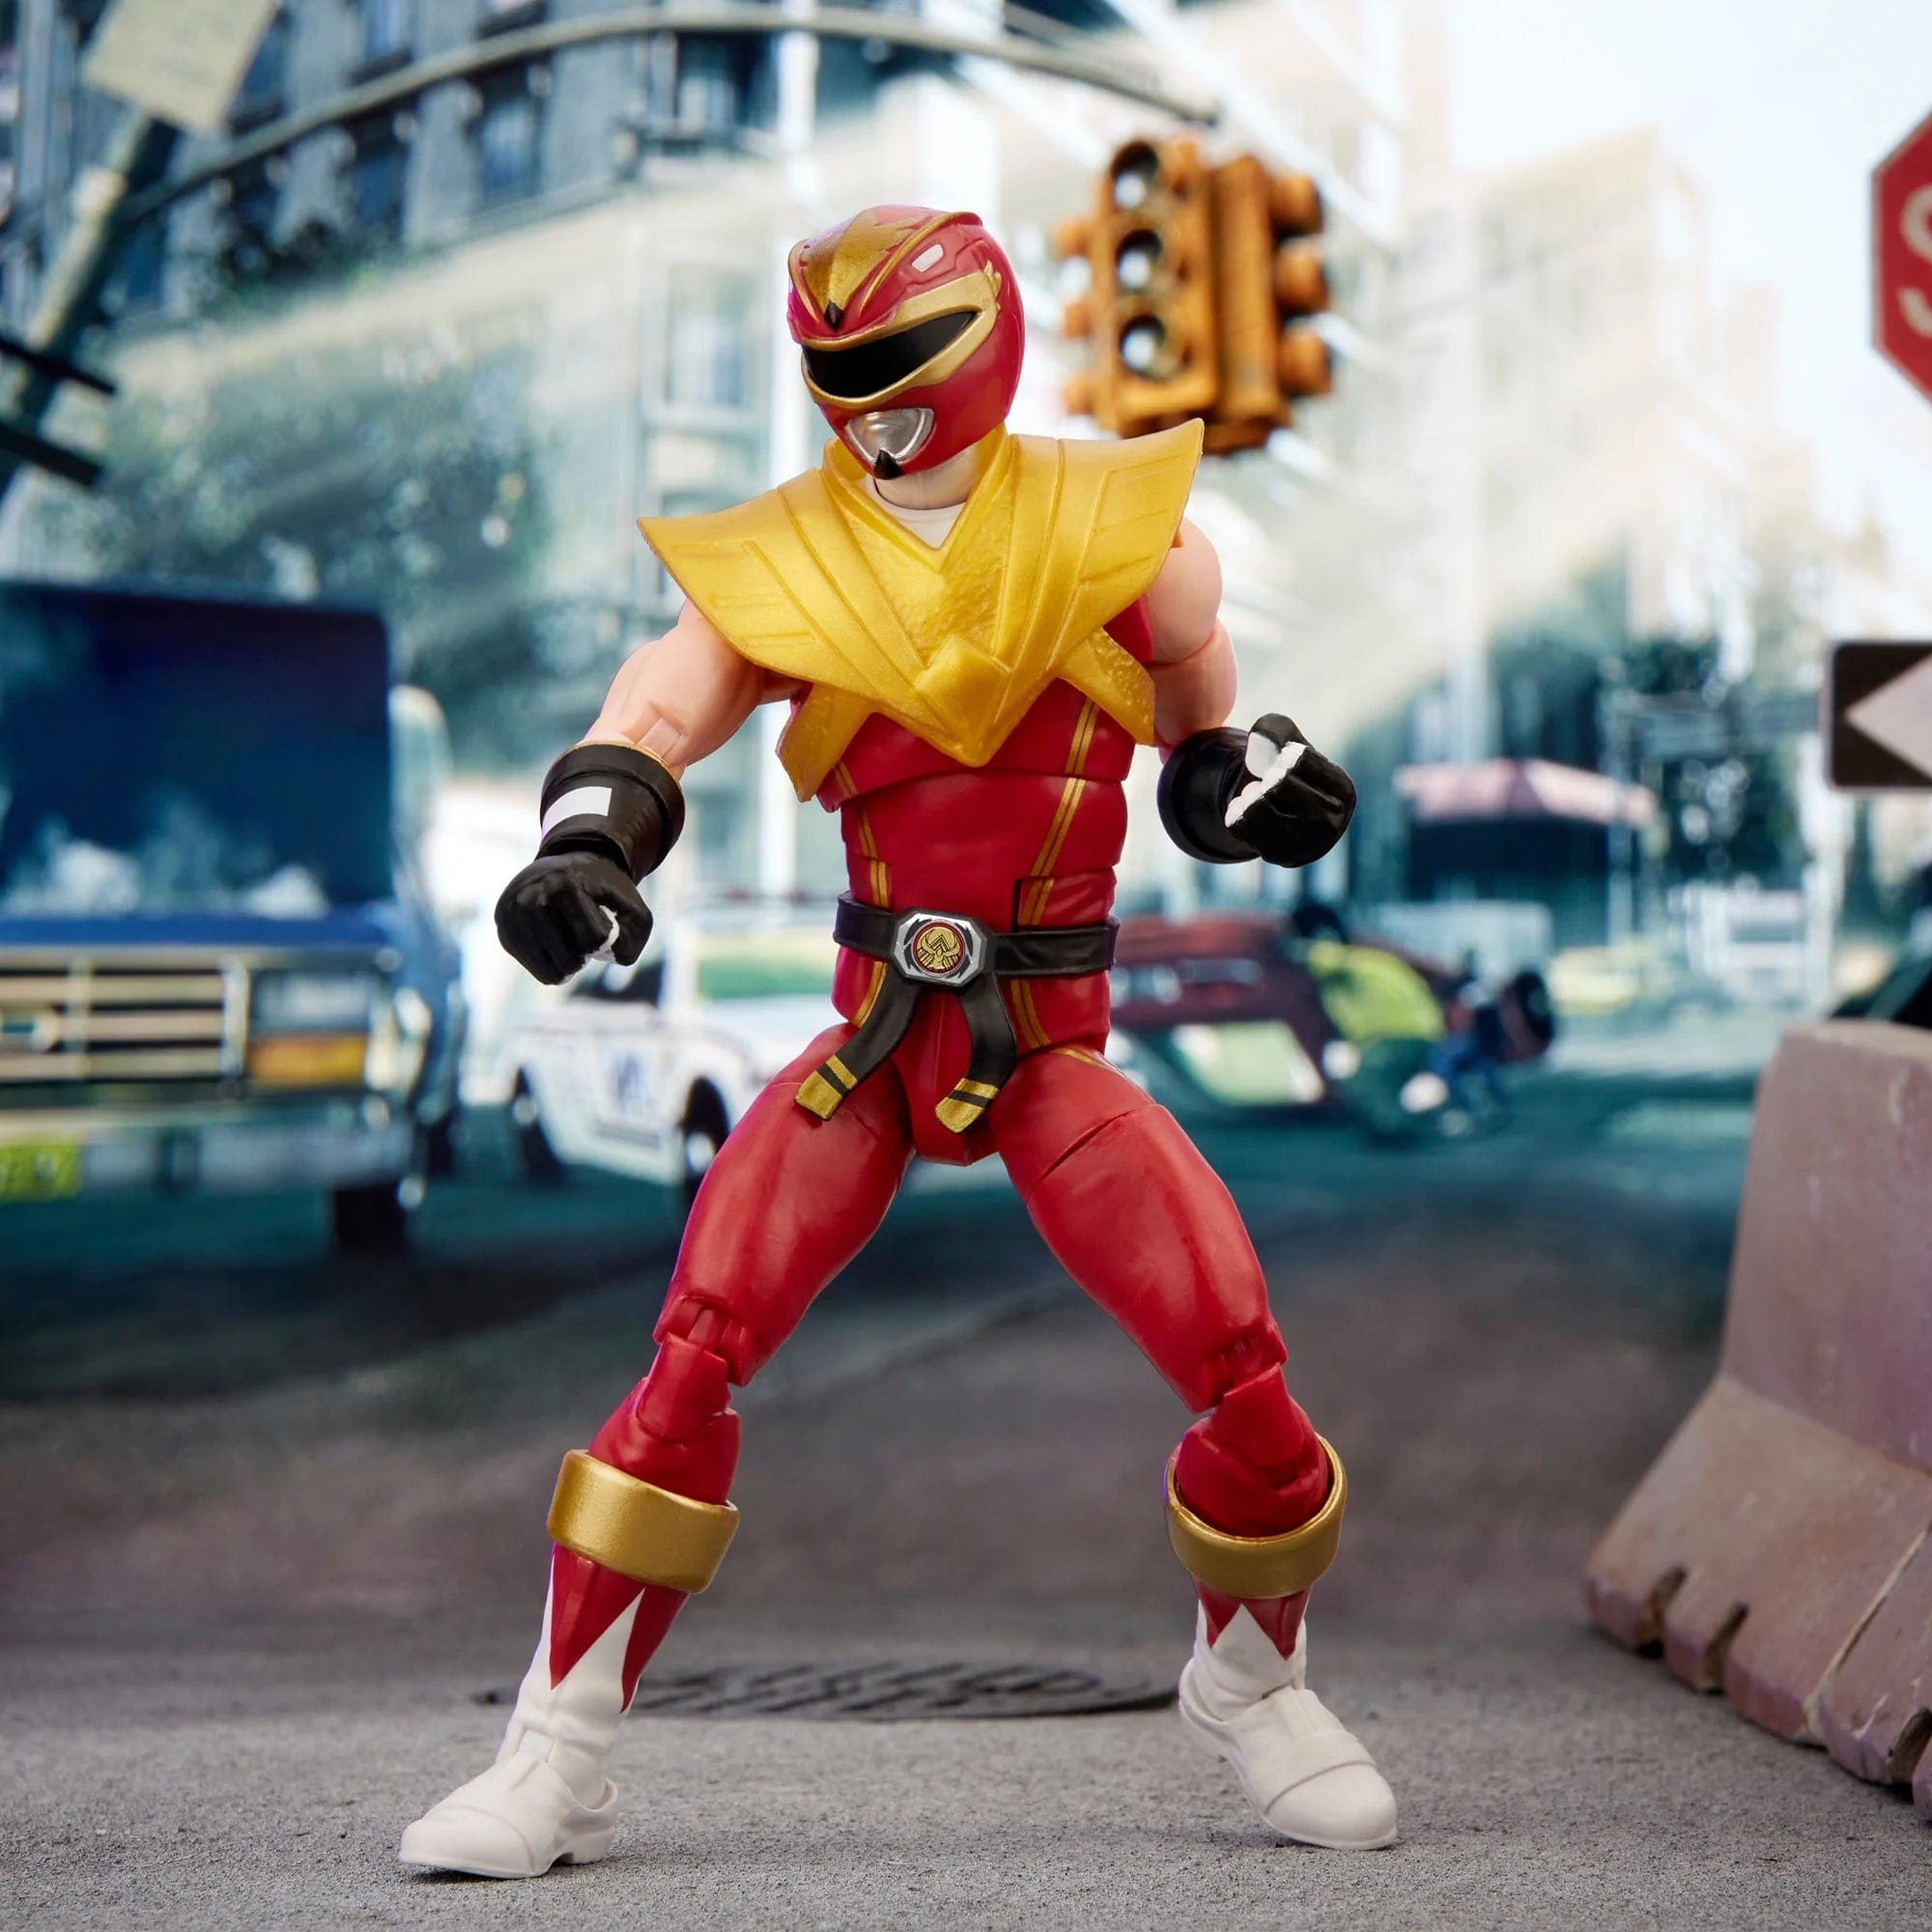 Power Rangers X Street Fighter Lightning Collection Morphed Ken Soaring Falcon Media Fight